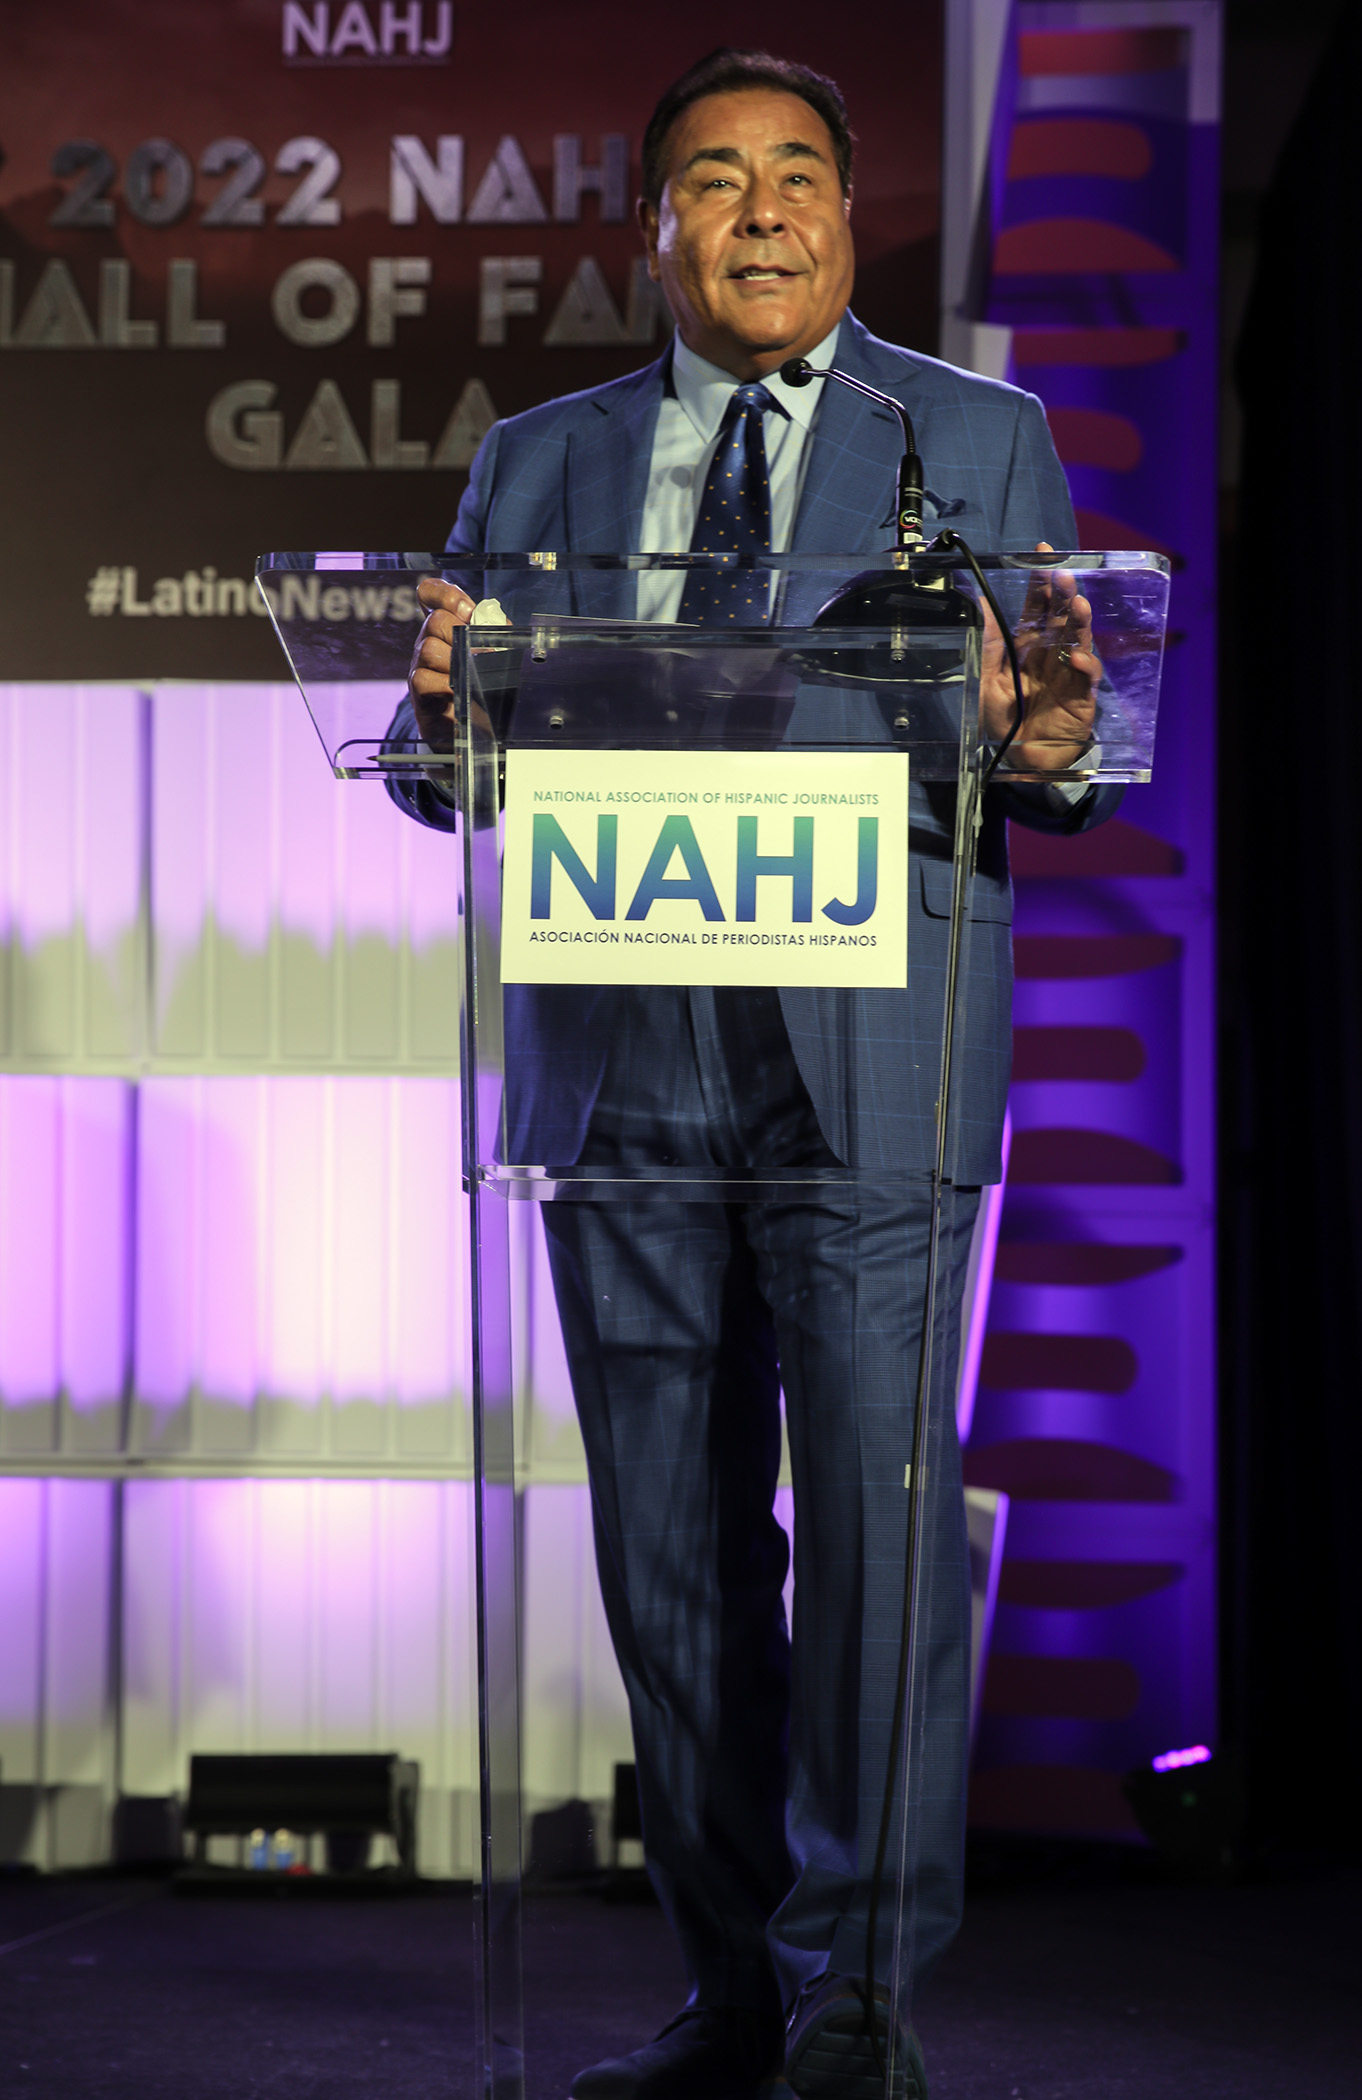 John Quiñones to the audience after receiving his National Association of Hispanic Journalists President's Award at the Hall of Fame Gala in Las Vegas, Nev., on Saturday, August 6, 2022.